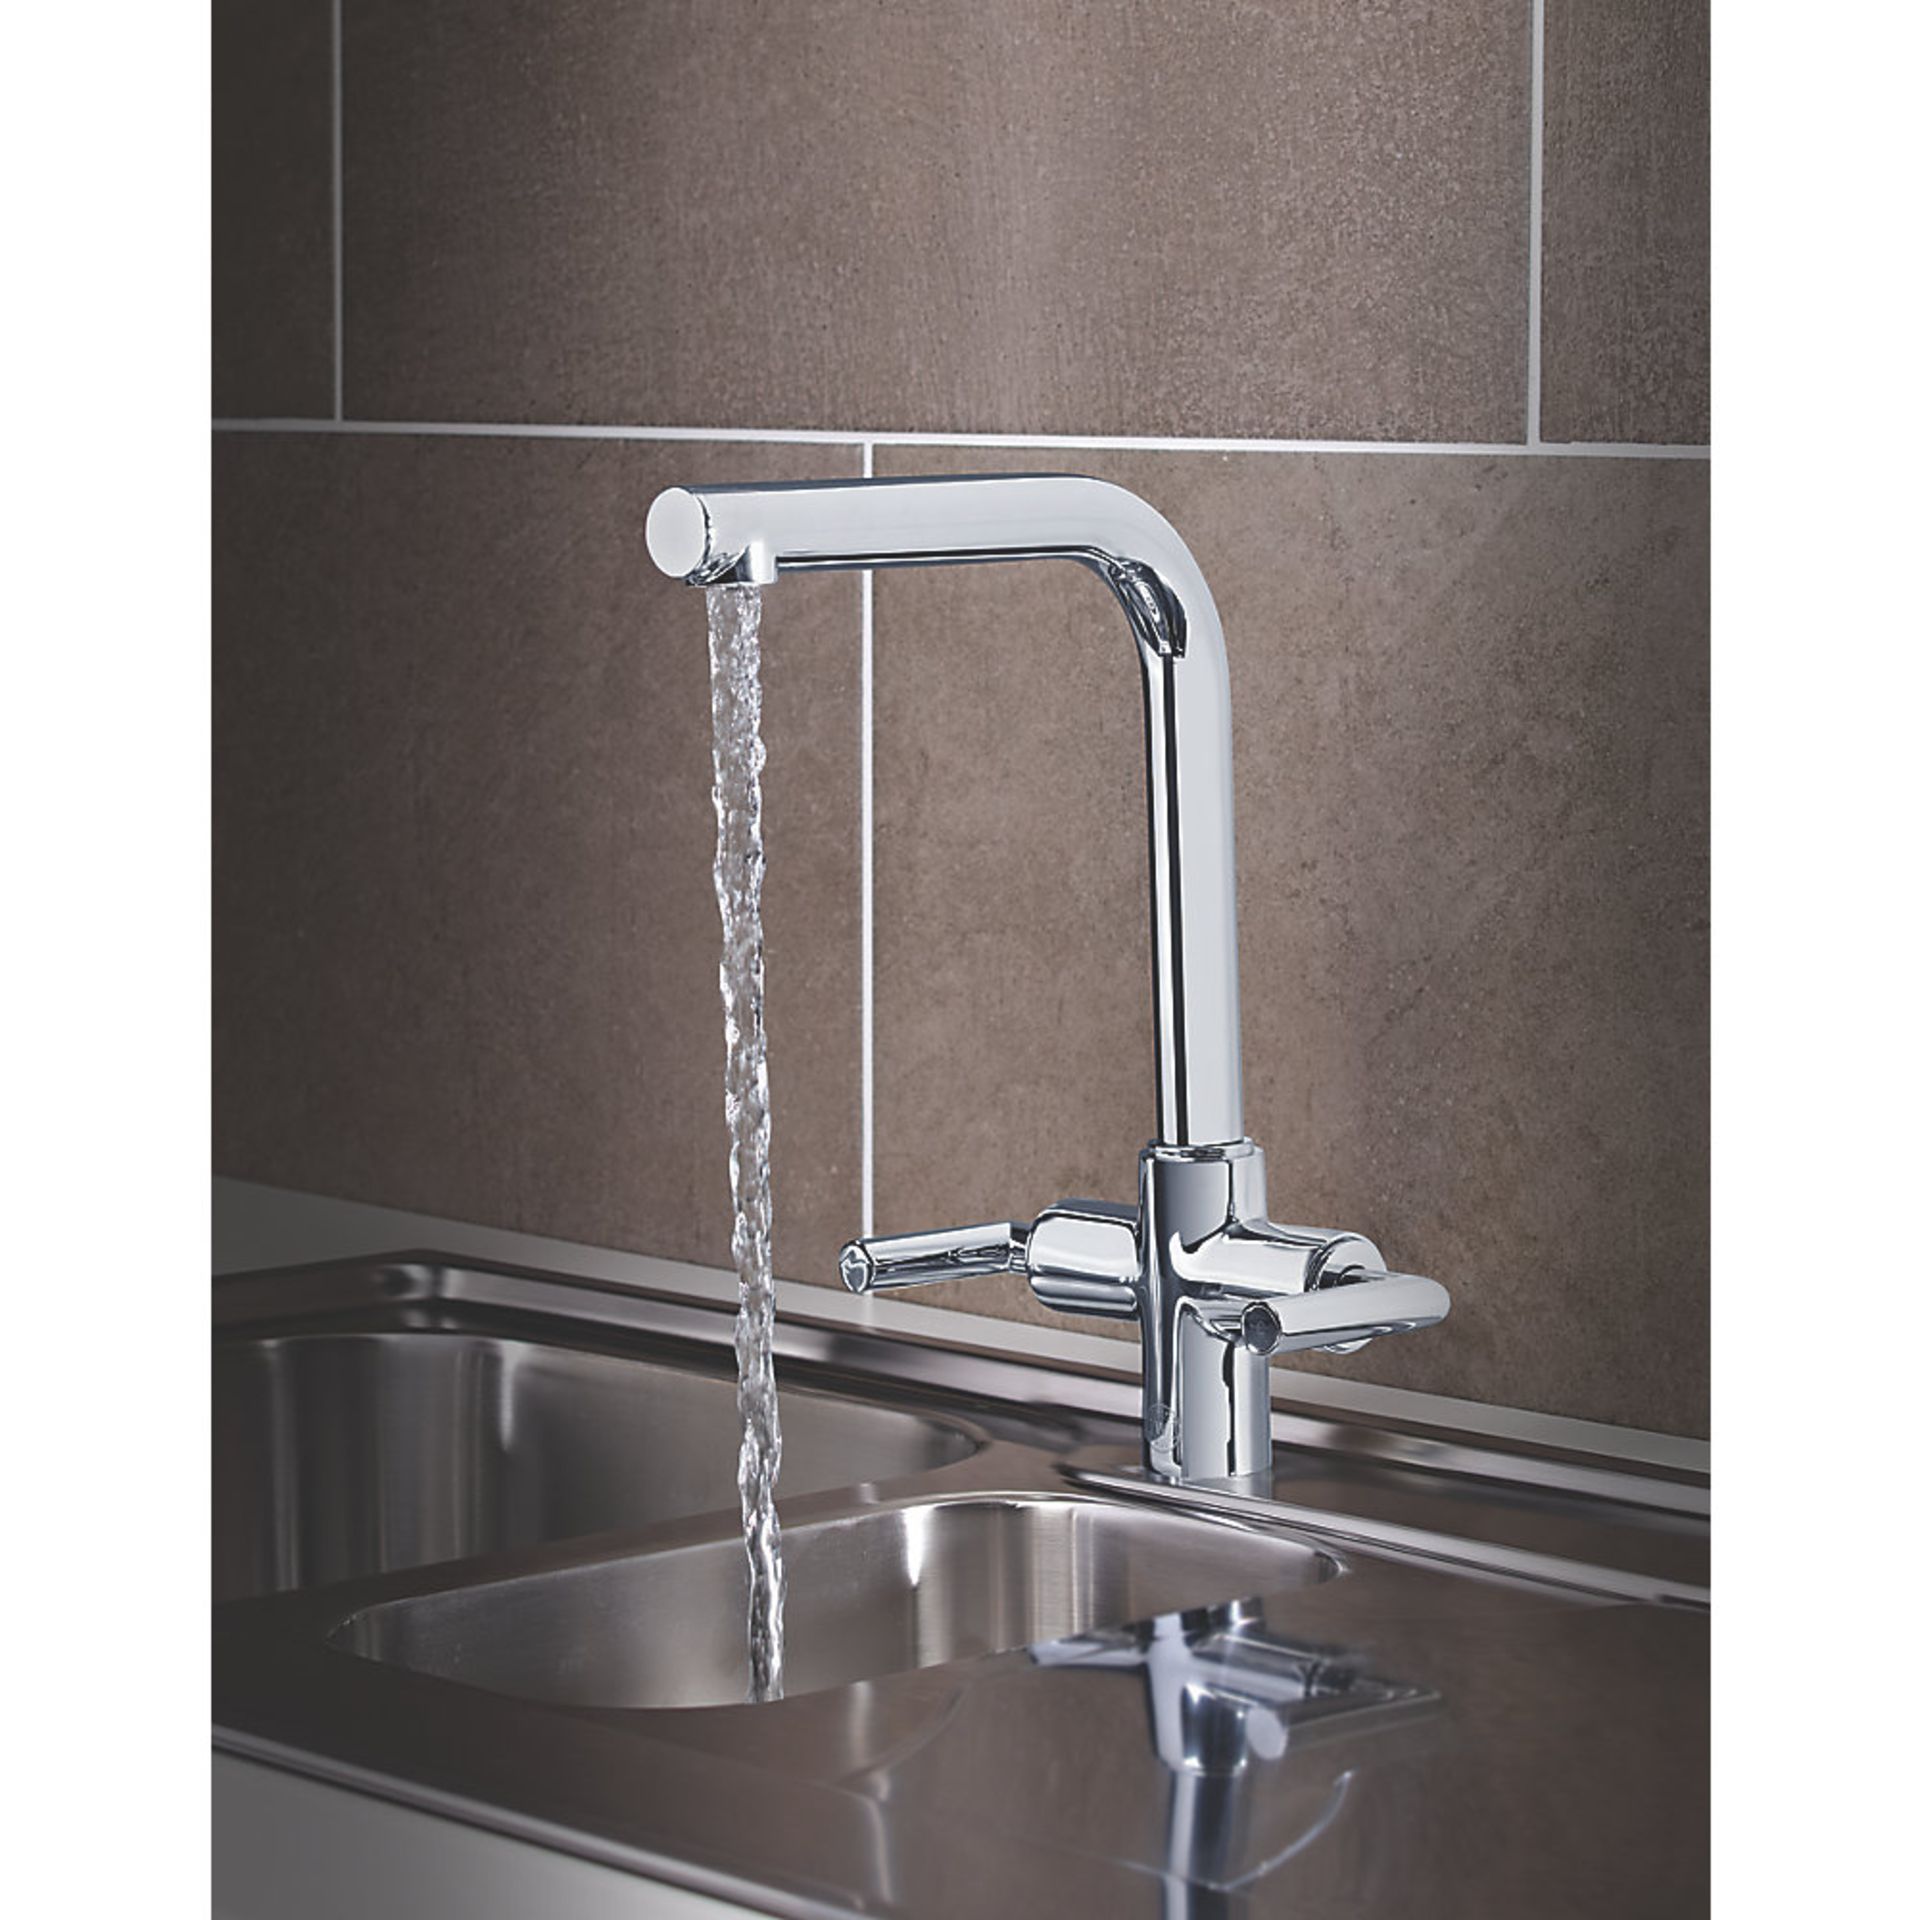 (LL92) Heritage Dolce Dual Lever Mono Mixer Tap Chrome. _ Turn Deck-Mounted with Swivel Spout Modern